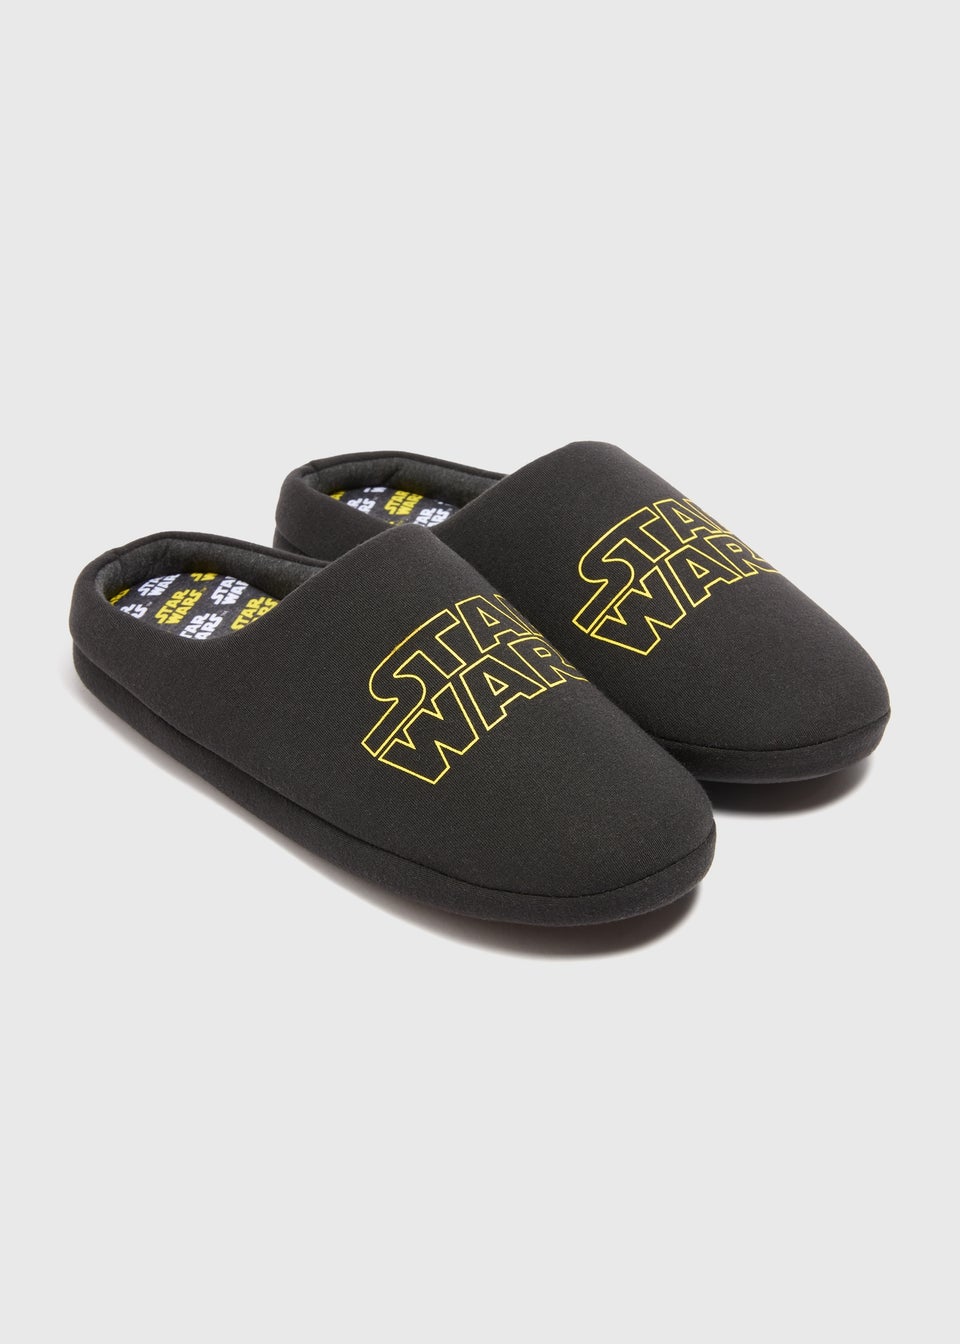 Star Wars Charcoal Slippers